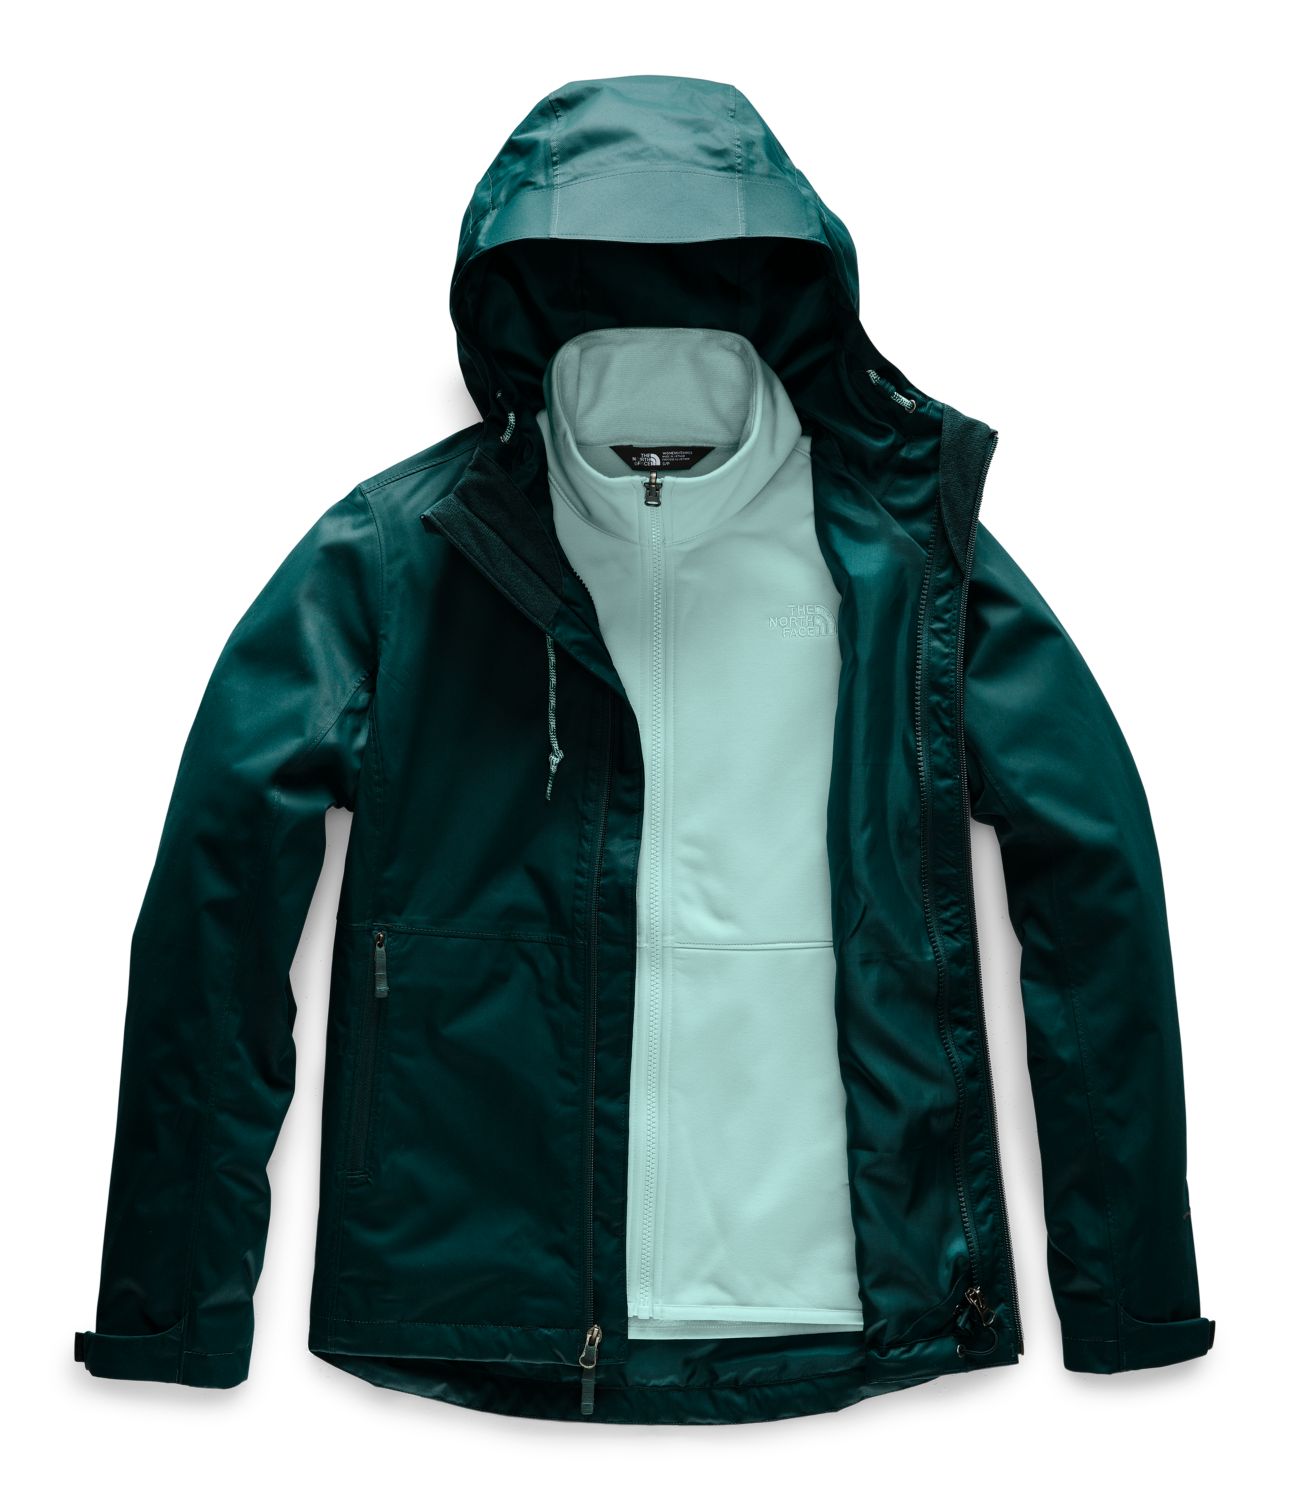 north face jacket cyber monday deal